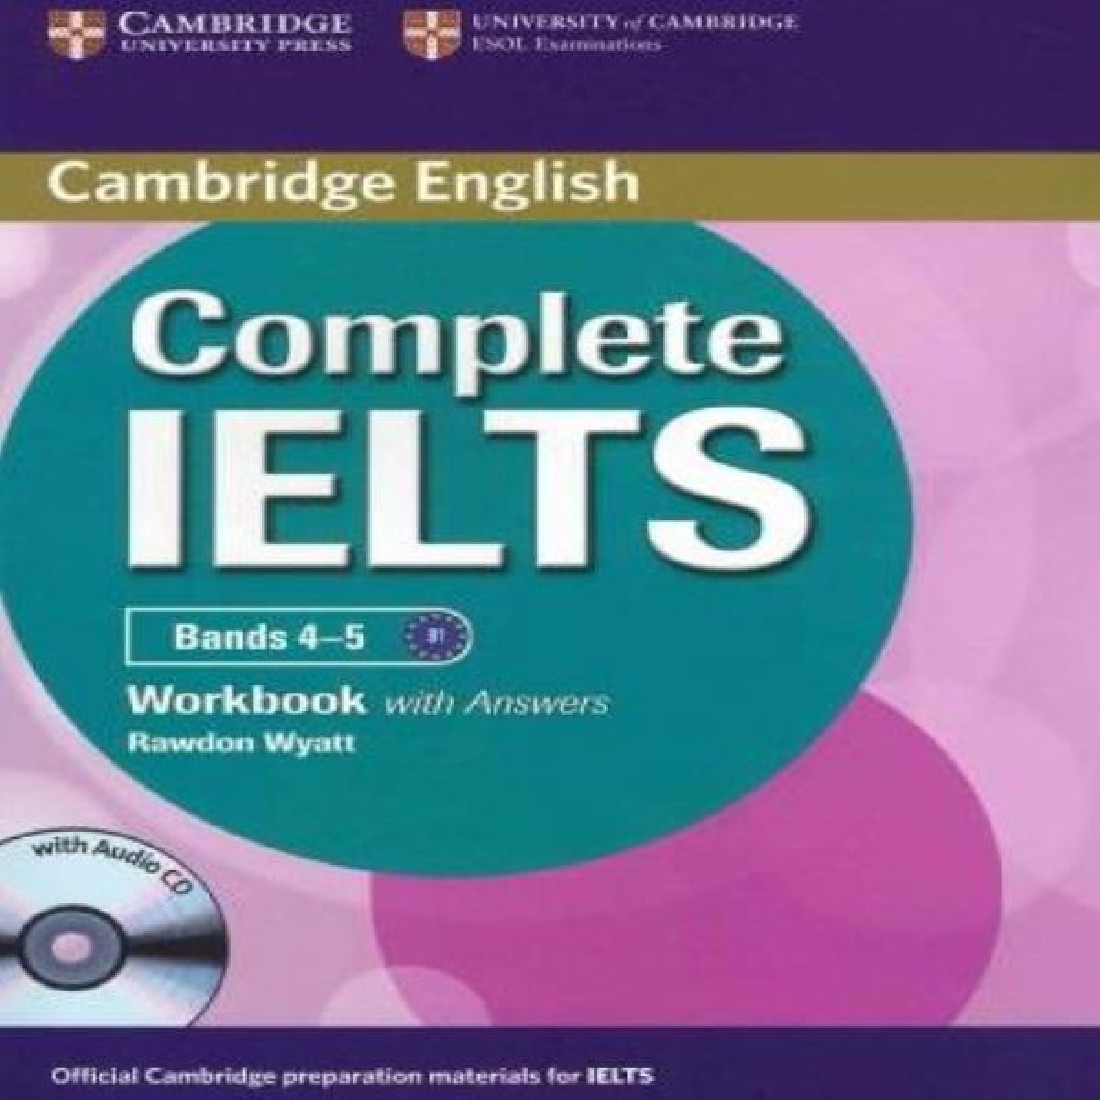 COMPLETE IELTS B1 WORKBOOK WITH ANSWERS (+CD) (BAND 4-5)